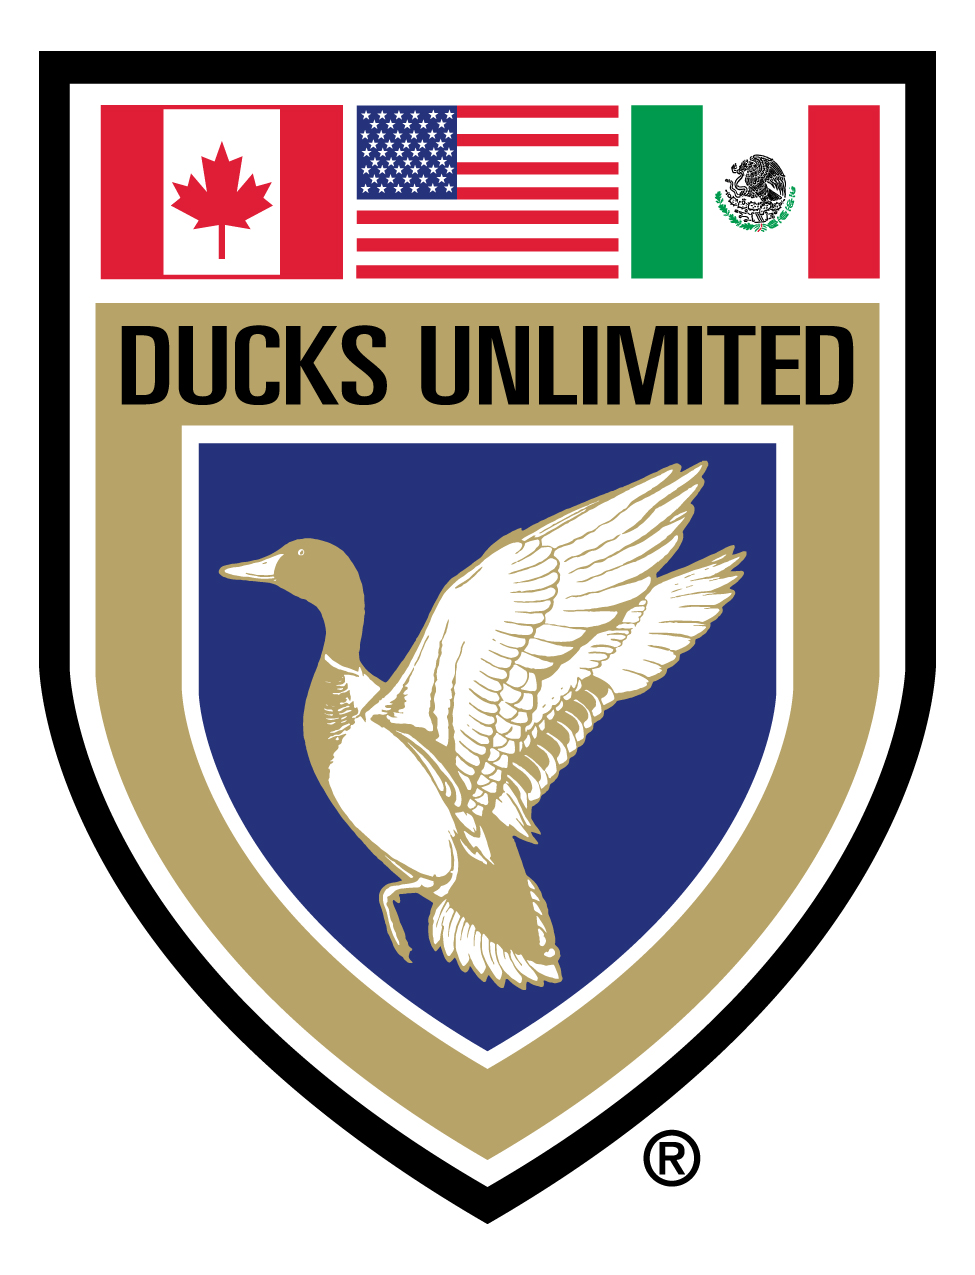 DUCKS UNLIMITED OFFICIAL DECAL new and real DU with trade mark 